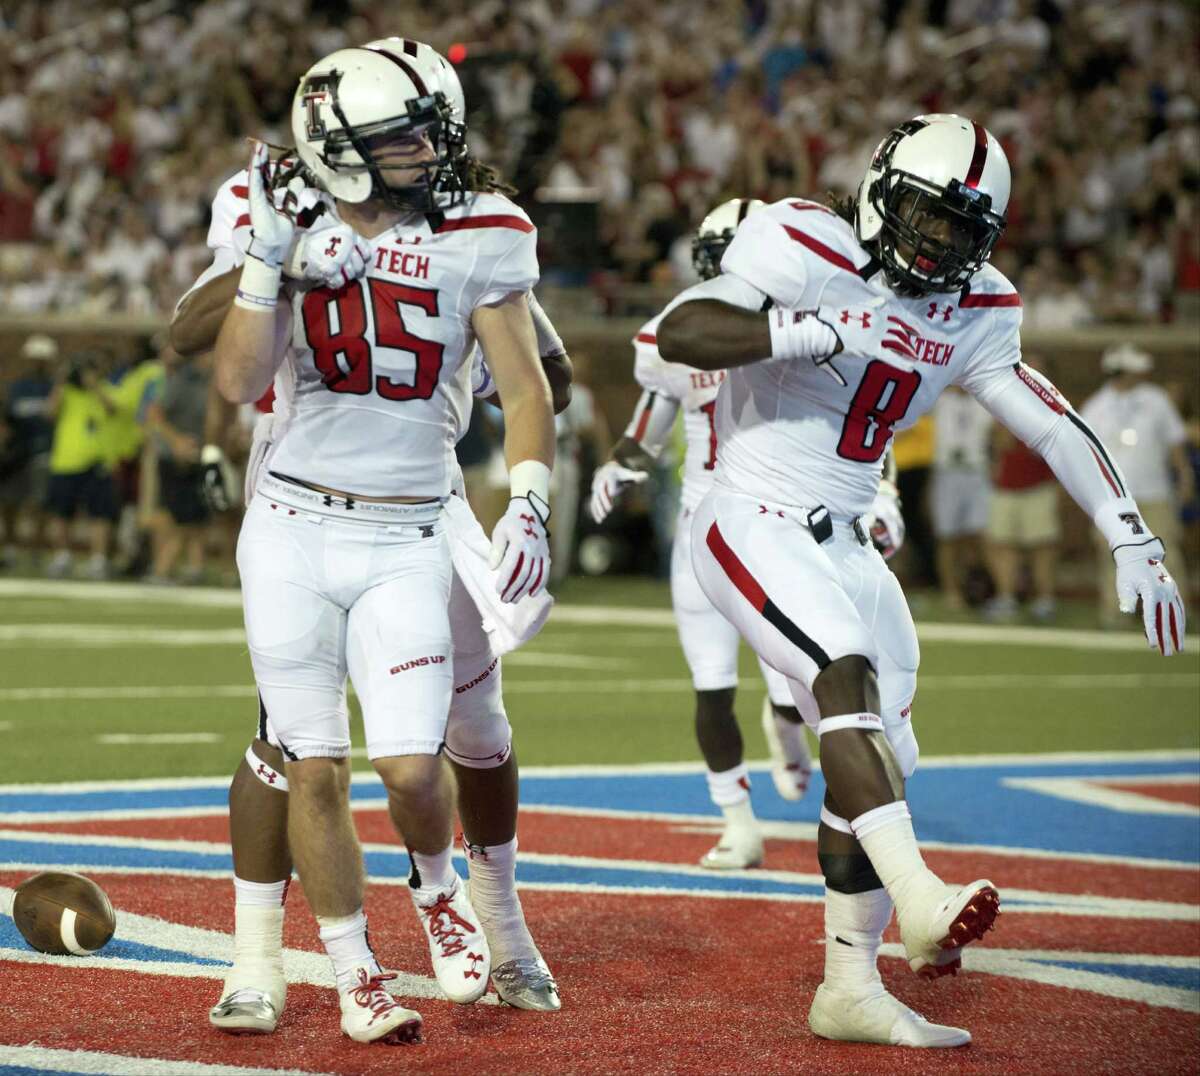 DALLAS, TX - AUGUST 30: Jordan Davis #85 of the Texas Tech Red Raiders celebrates with teammates after scoring a touchdown against the Southern Methodist Mustangs on August 30, 2013 at Gerald J. Ford Stadium in Dallas, Texas. (Photo by Cooper Neill/Getty Images)